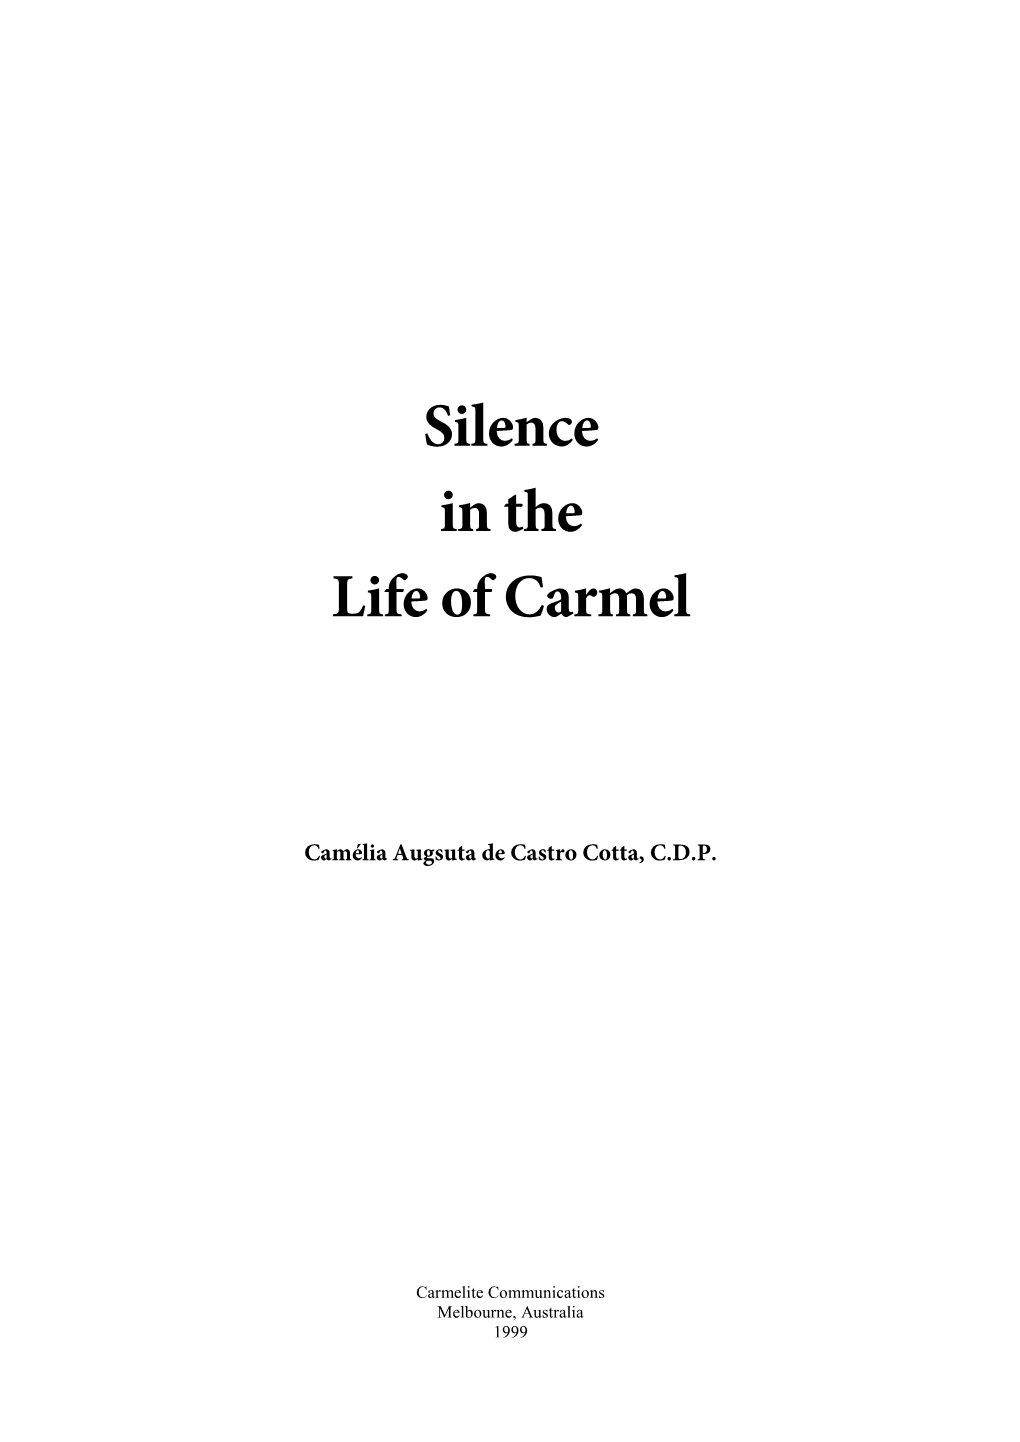 Silence in the Life of Carmel